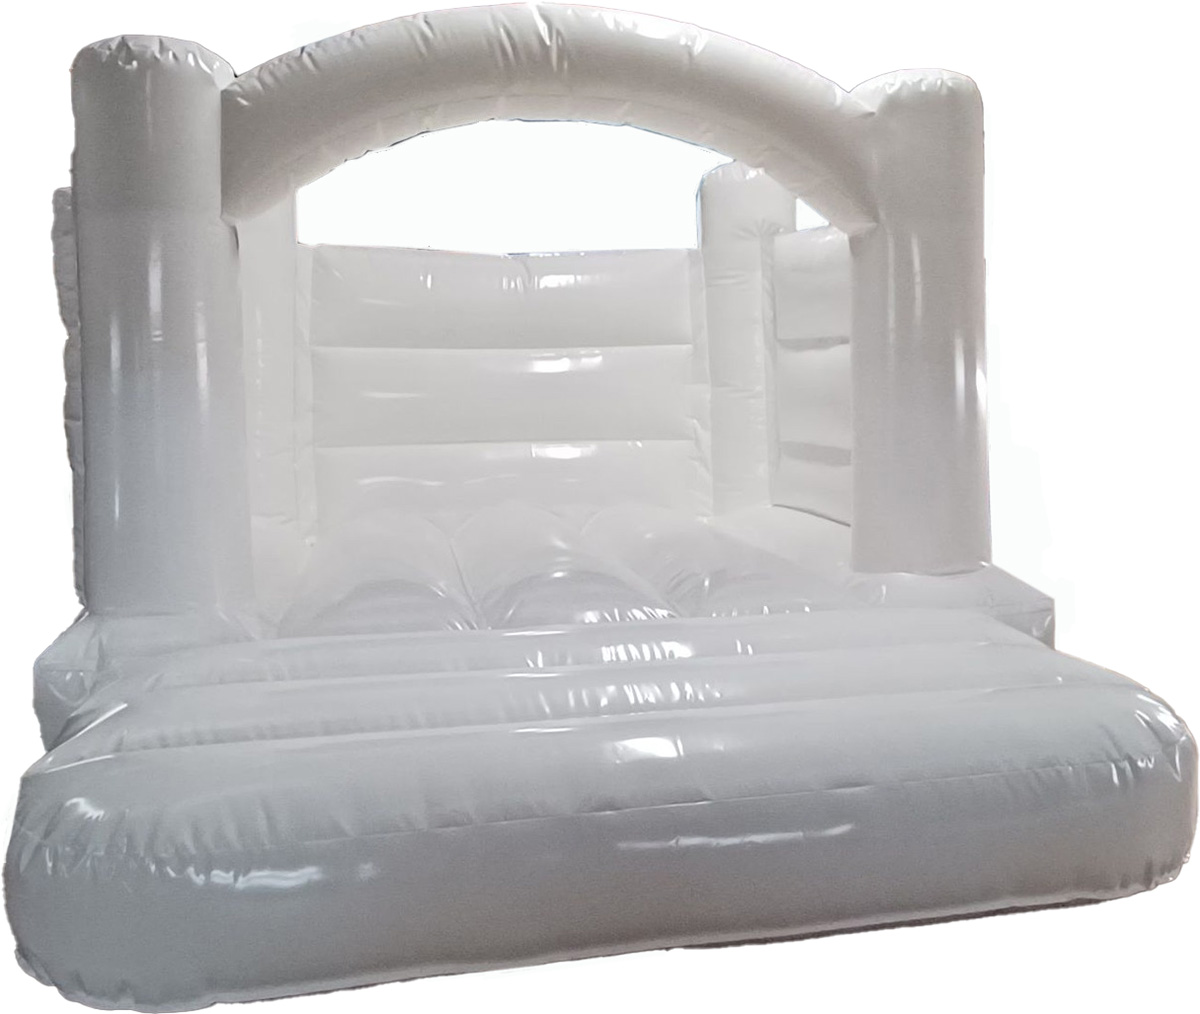 Bouncy Castle Sales - BC719 - Bouncy Inflatable for sale